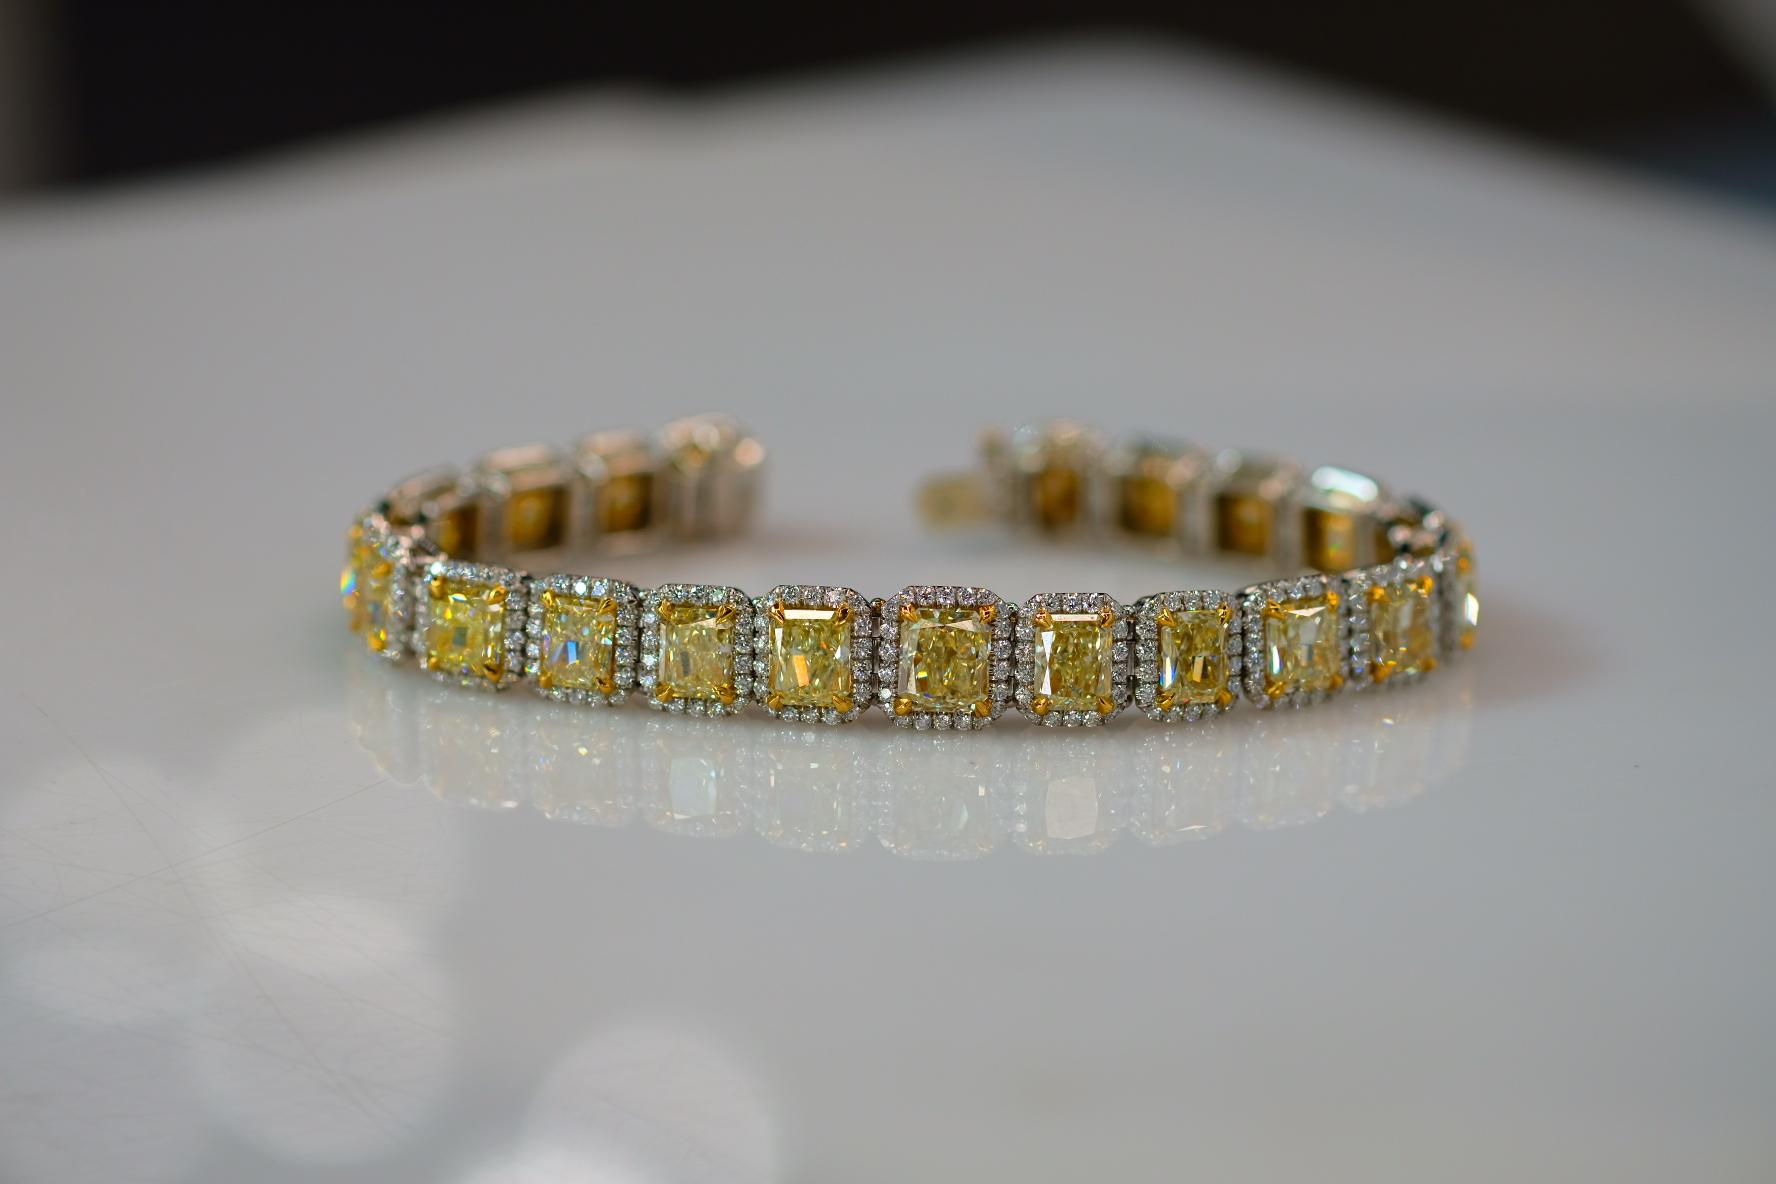 Sensational radiant cut diamond bracelet in 18K yellow gold and platinum mounted with 21 radiant cut diamonds. This handmade diamond bracelet is mounted with brilliant light fancy yellow XYZ colors GIA certified radiant cut diamonds. Each diamond is